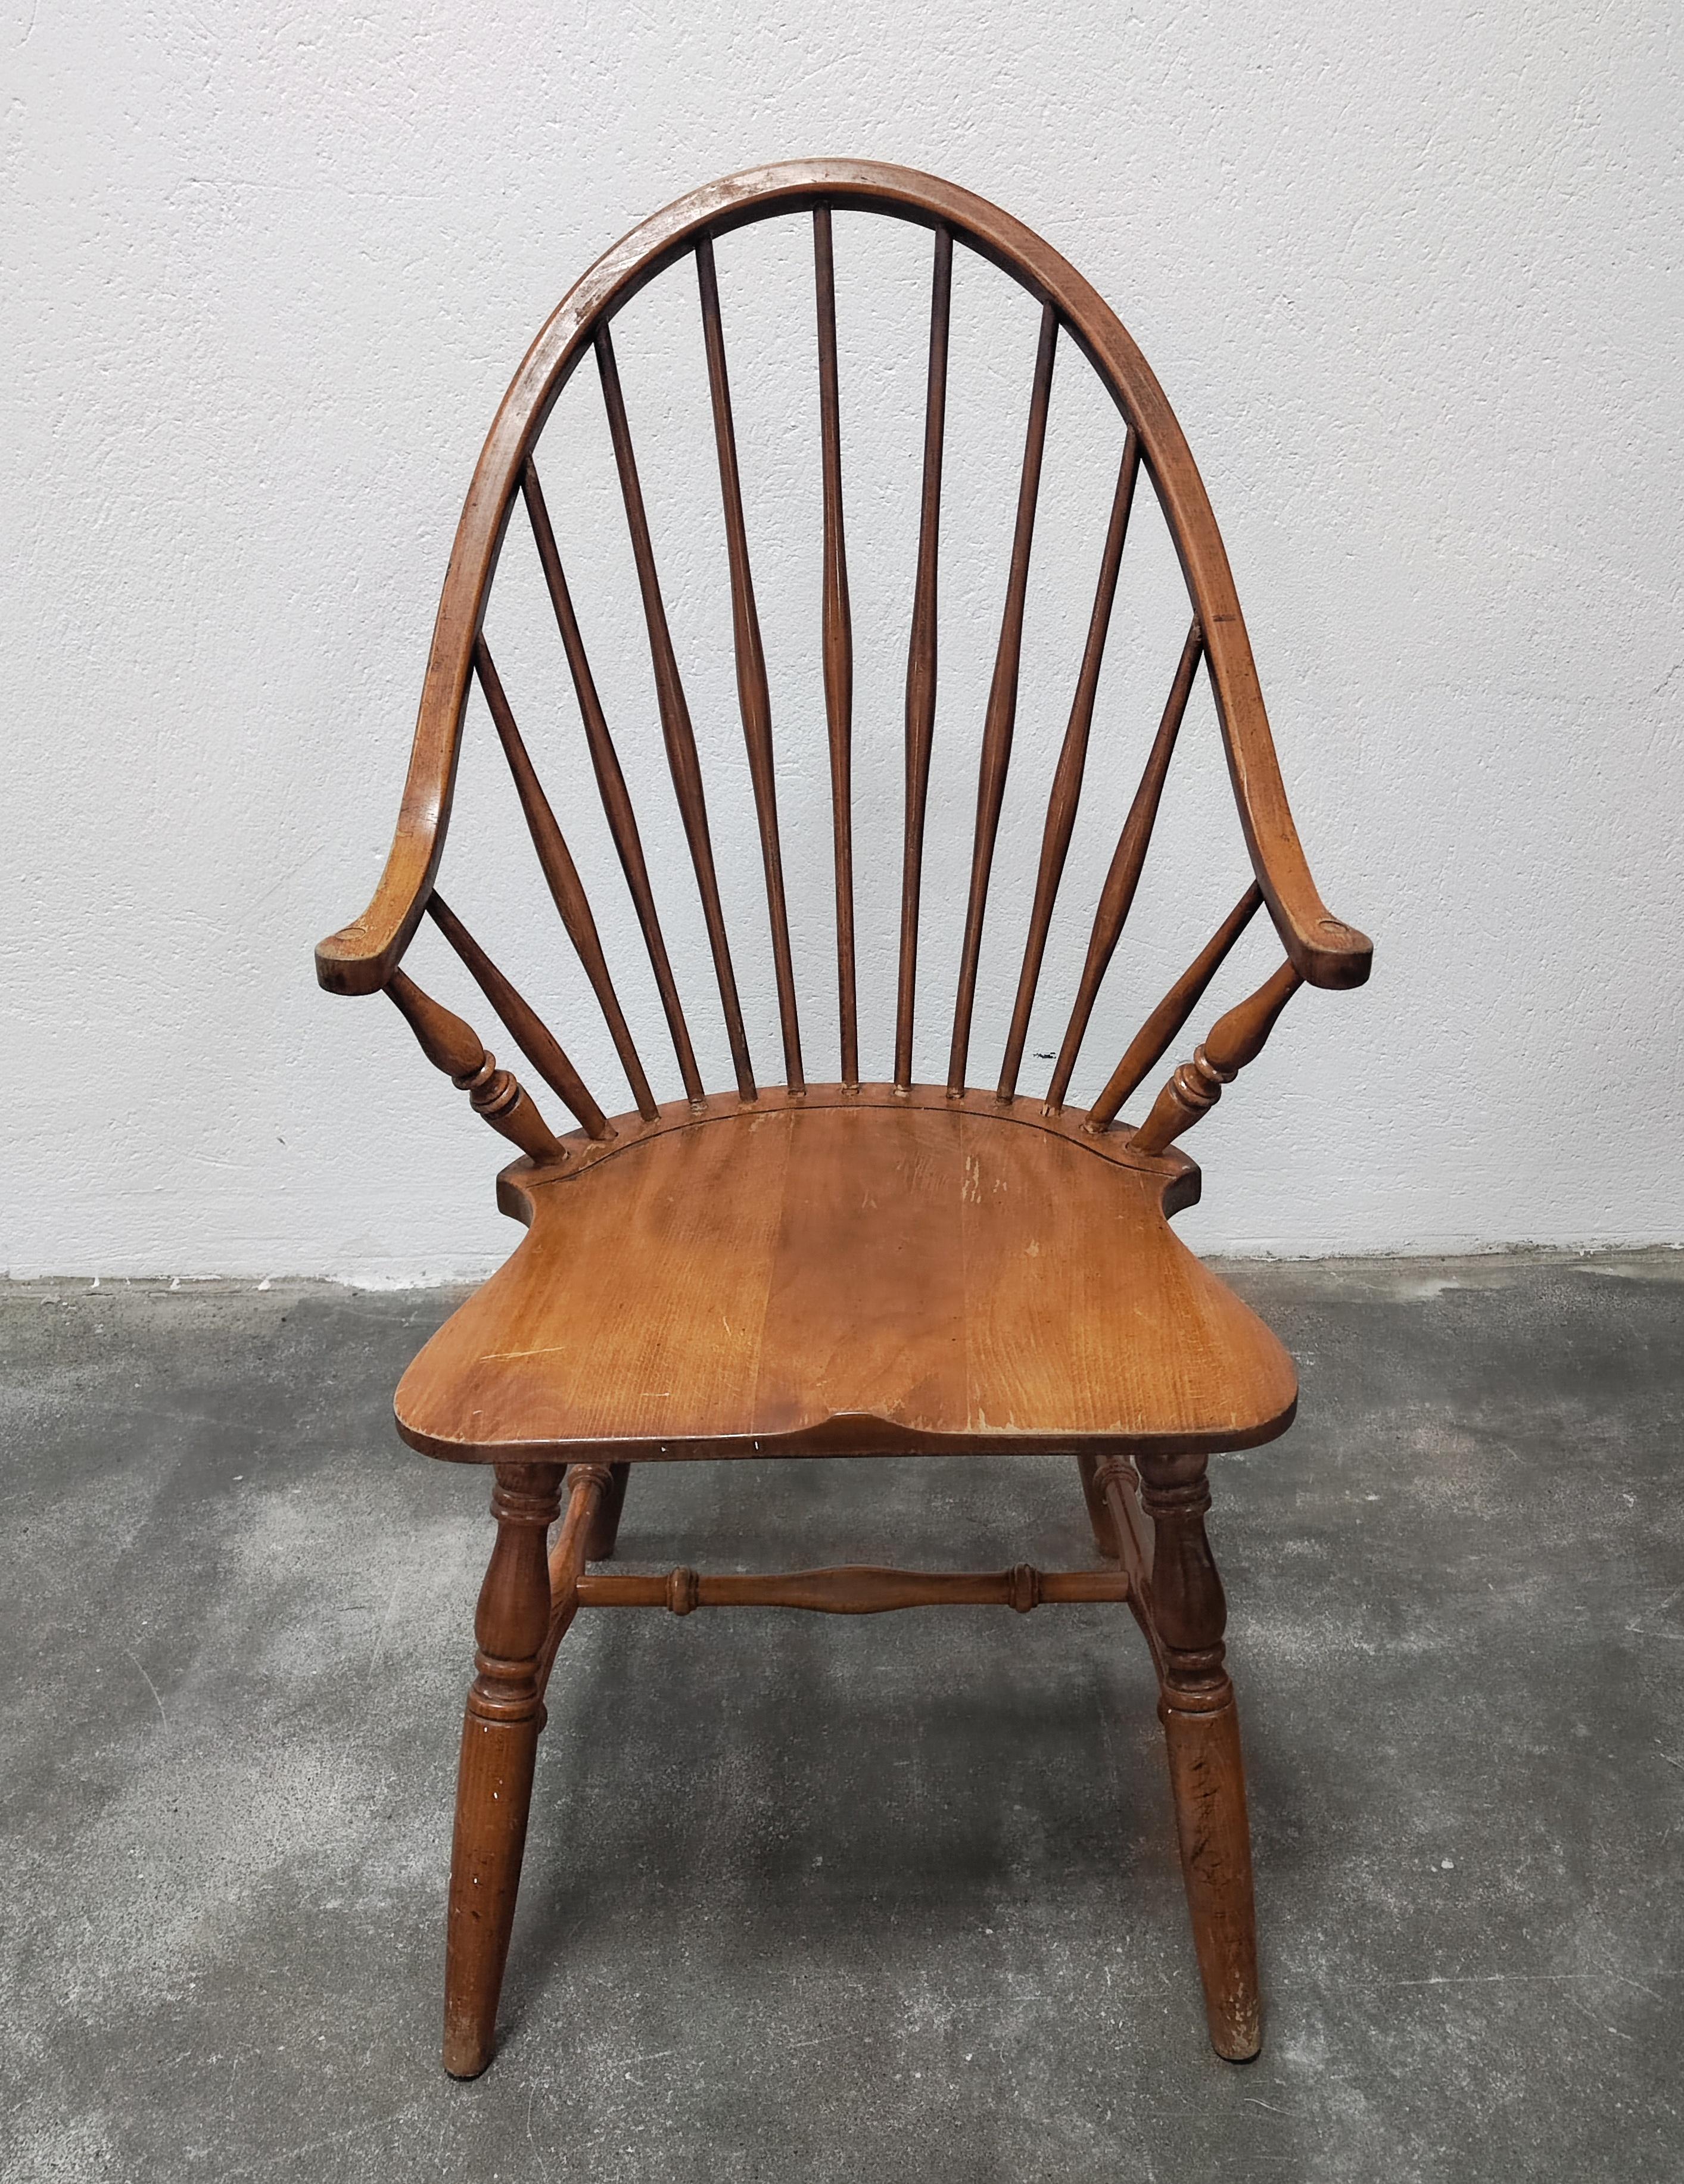 In this listing you will find a Yugoslavian Windsor Armchair in Beech, manufactured in Yugoslavia in 1950s. It features tall spindle back, making it one of the rarest models in the long line of Windsor chairs. The chair is done in solid beech wood